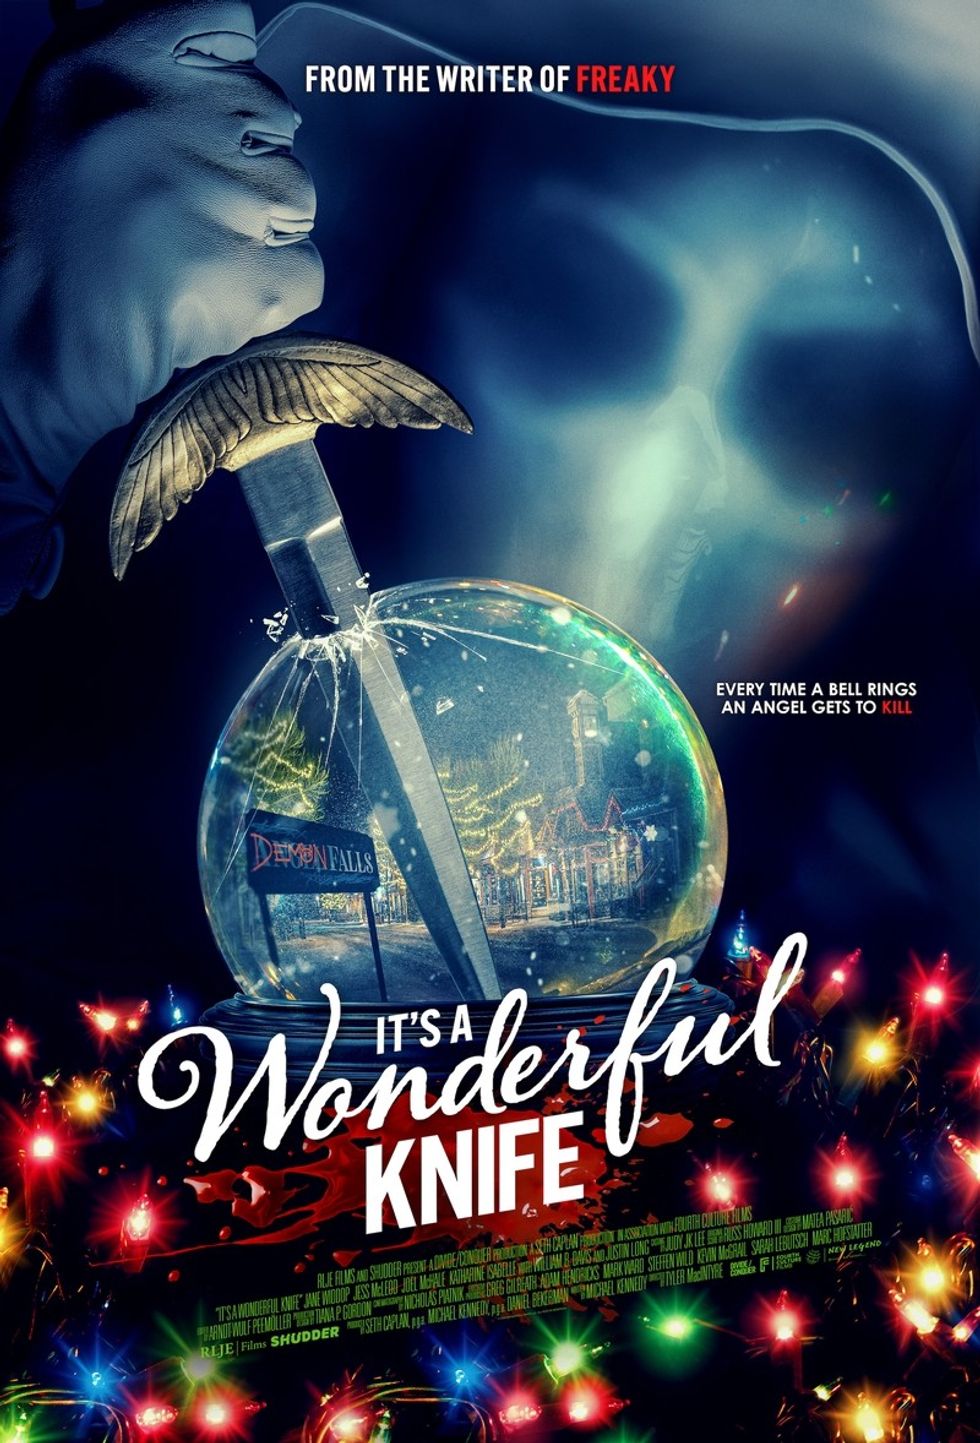 The poster for 'It's a Wonderful Knife'